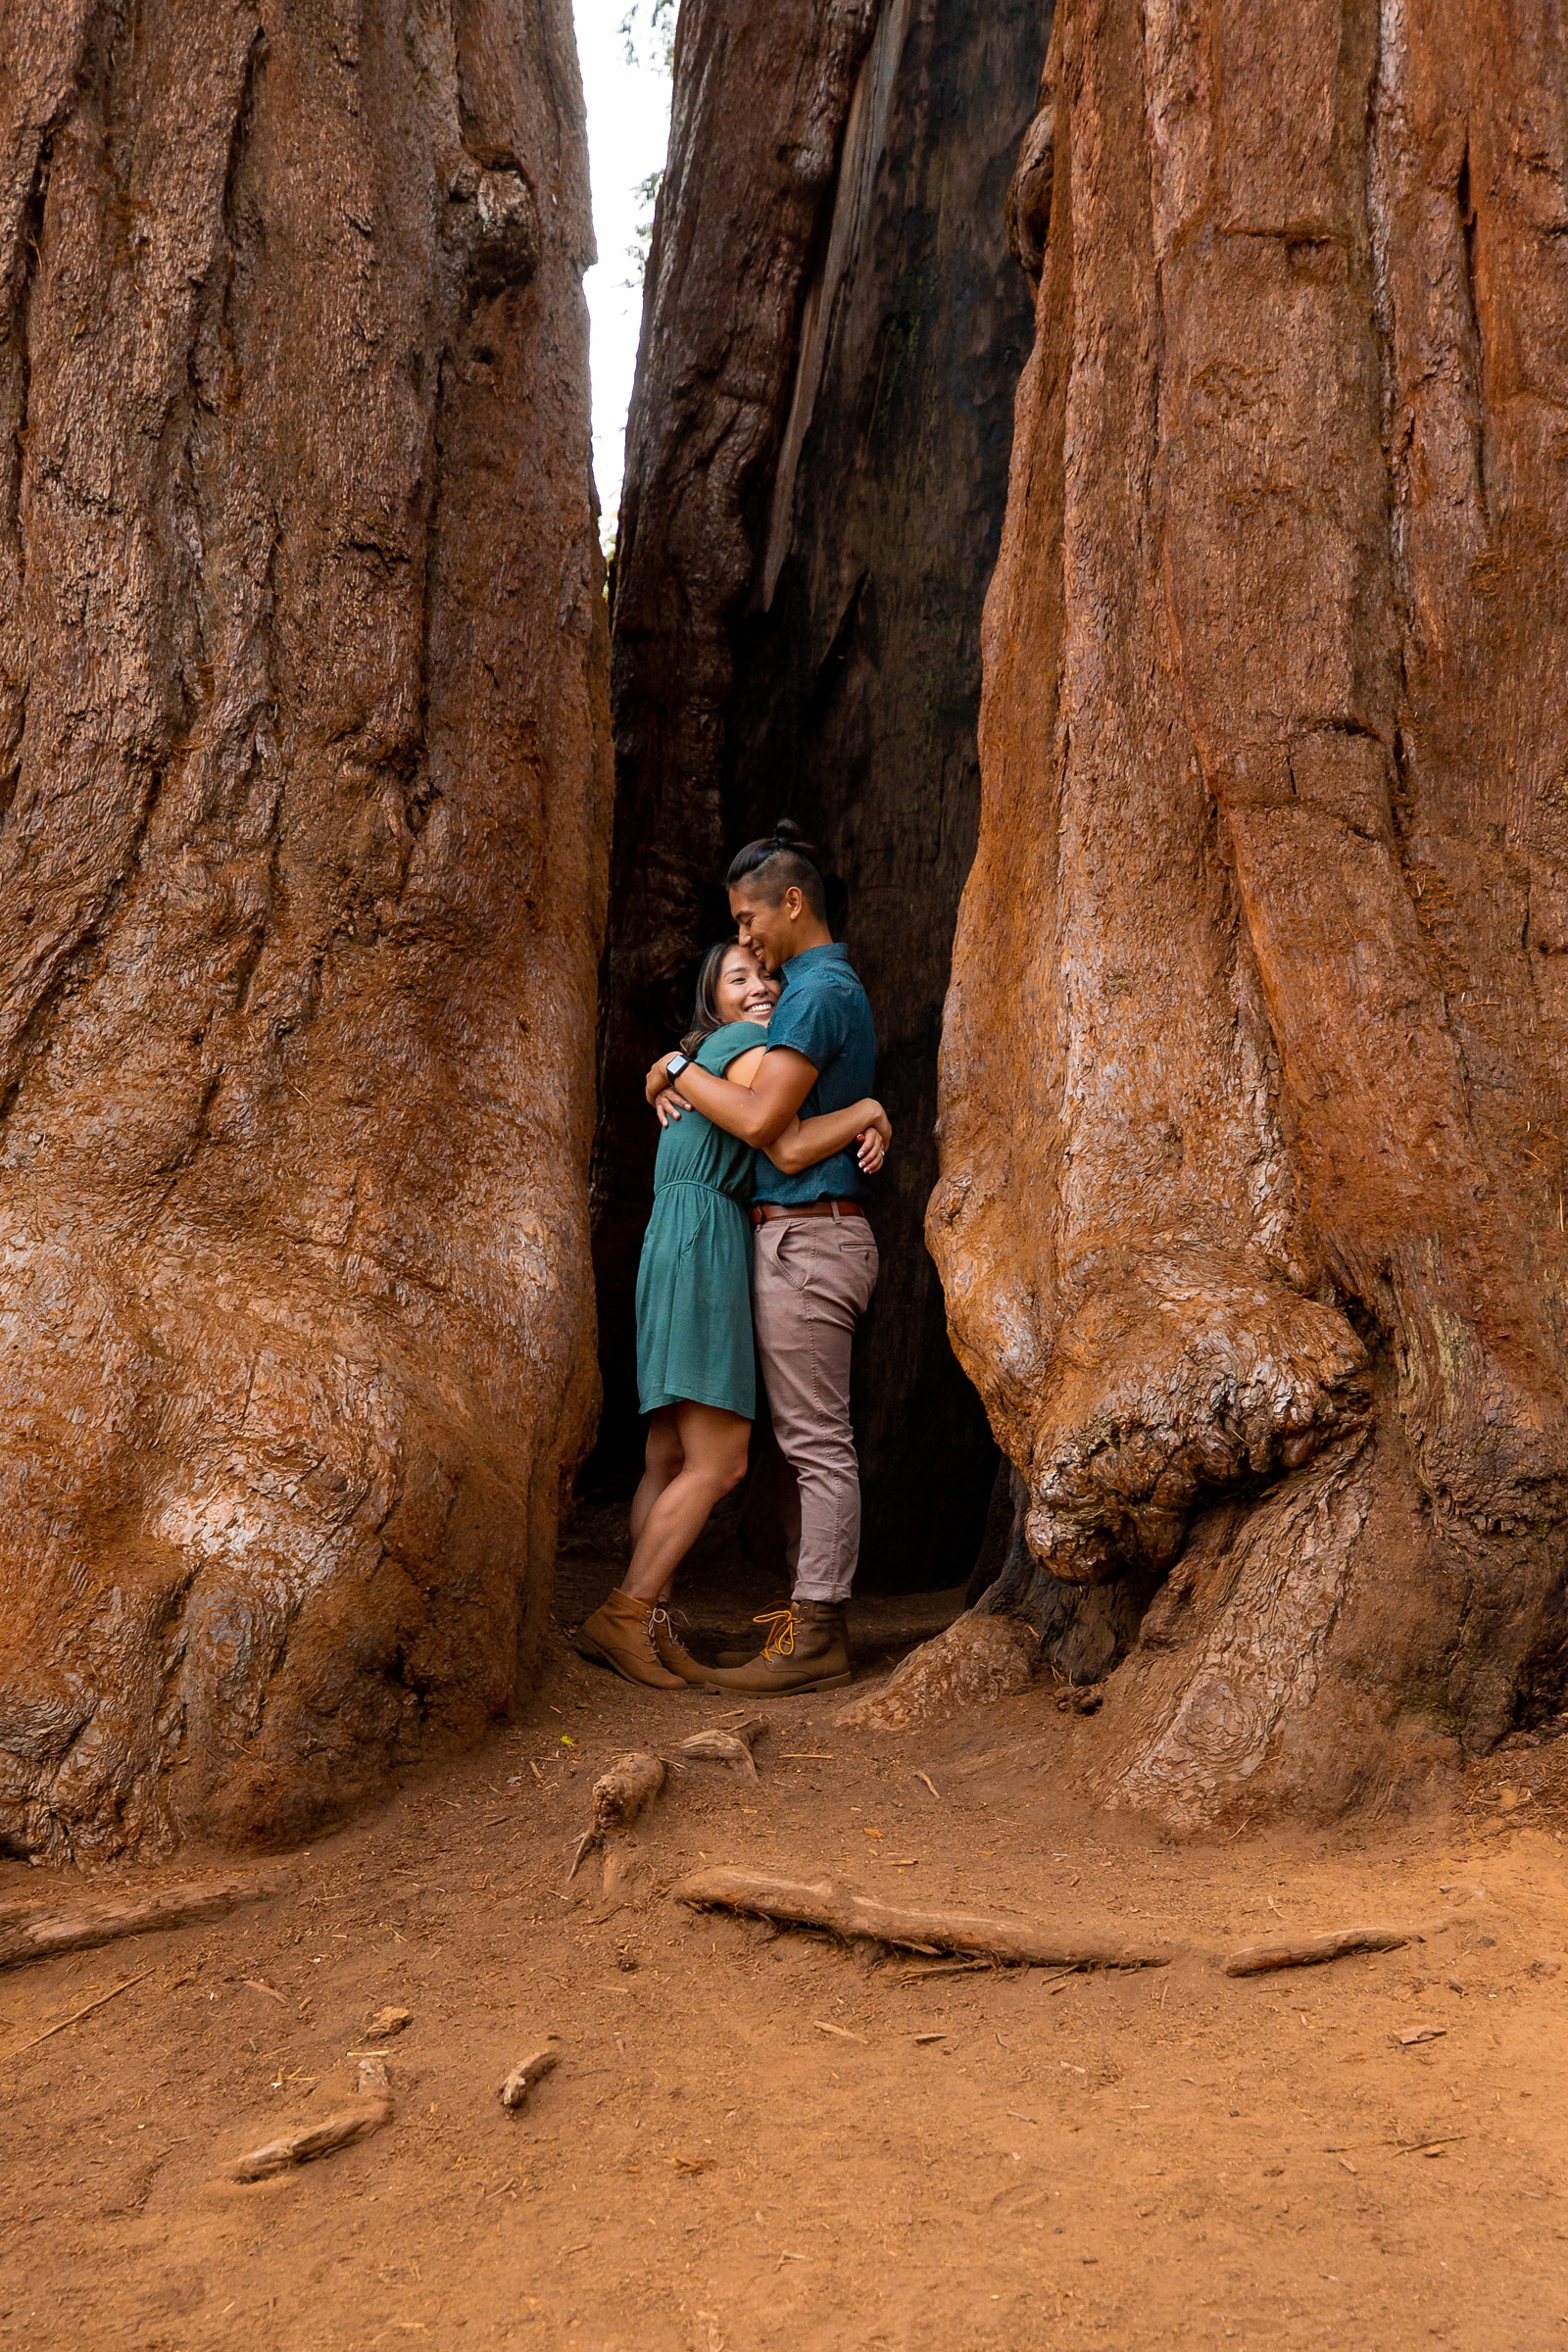 Hugging engaged couple inside at tree at Sequoia National Park.